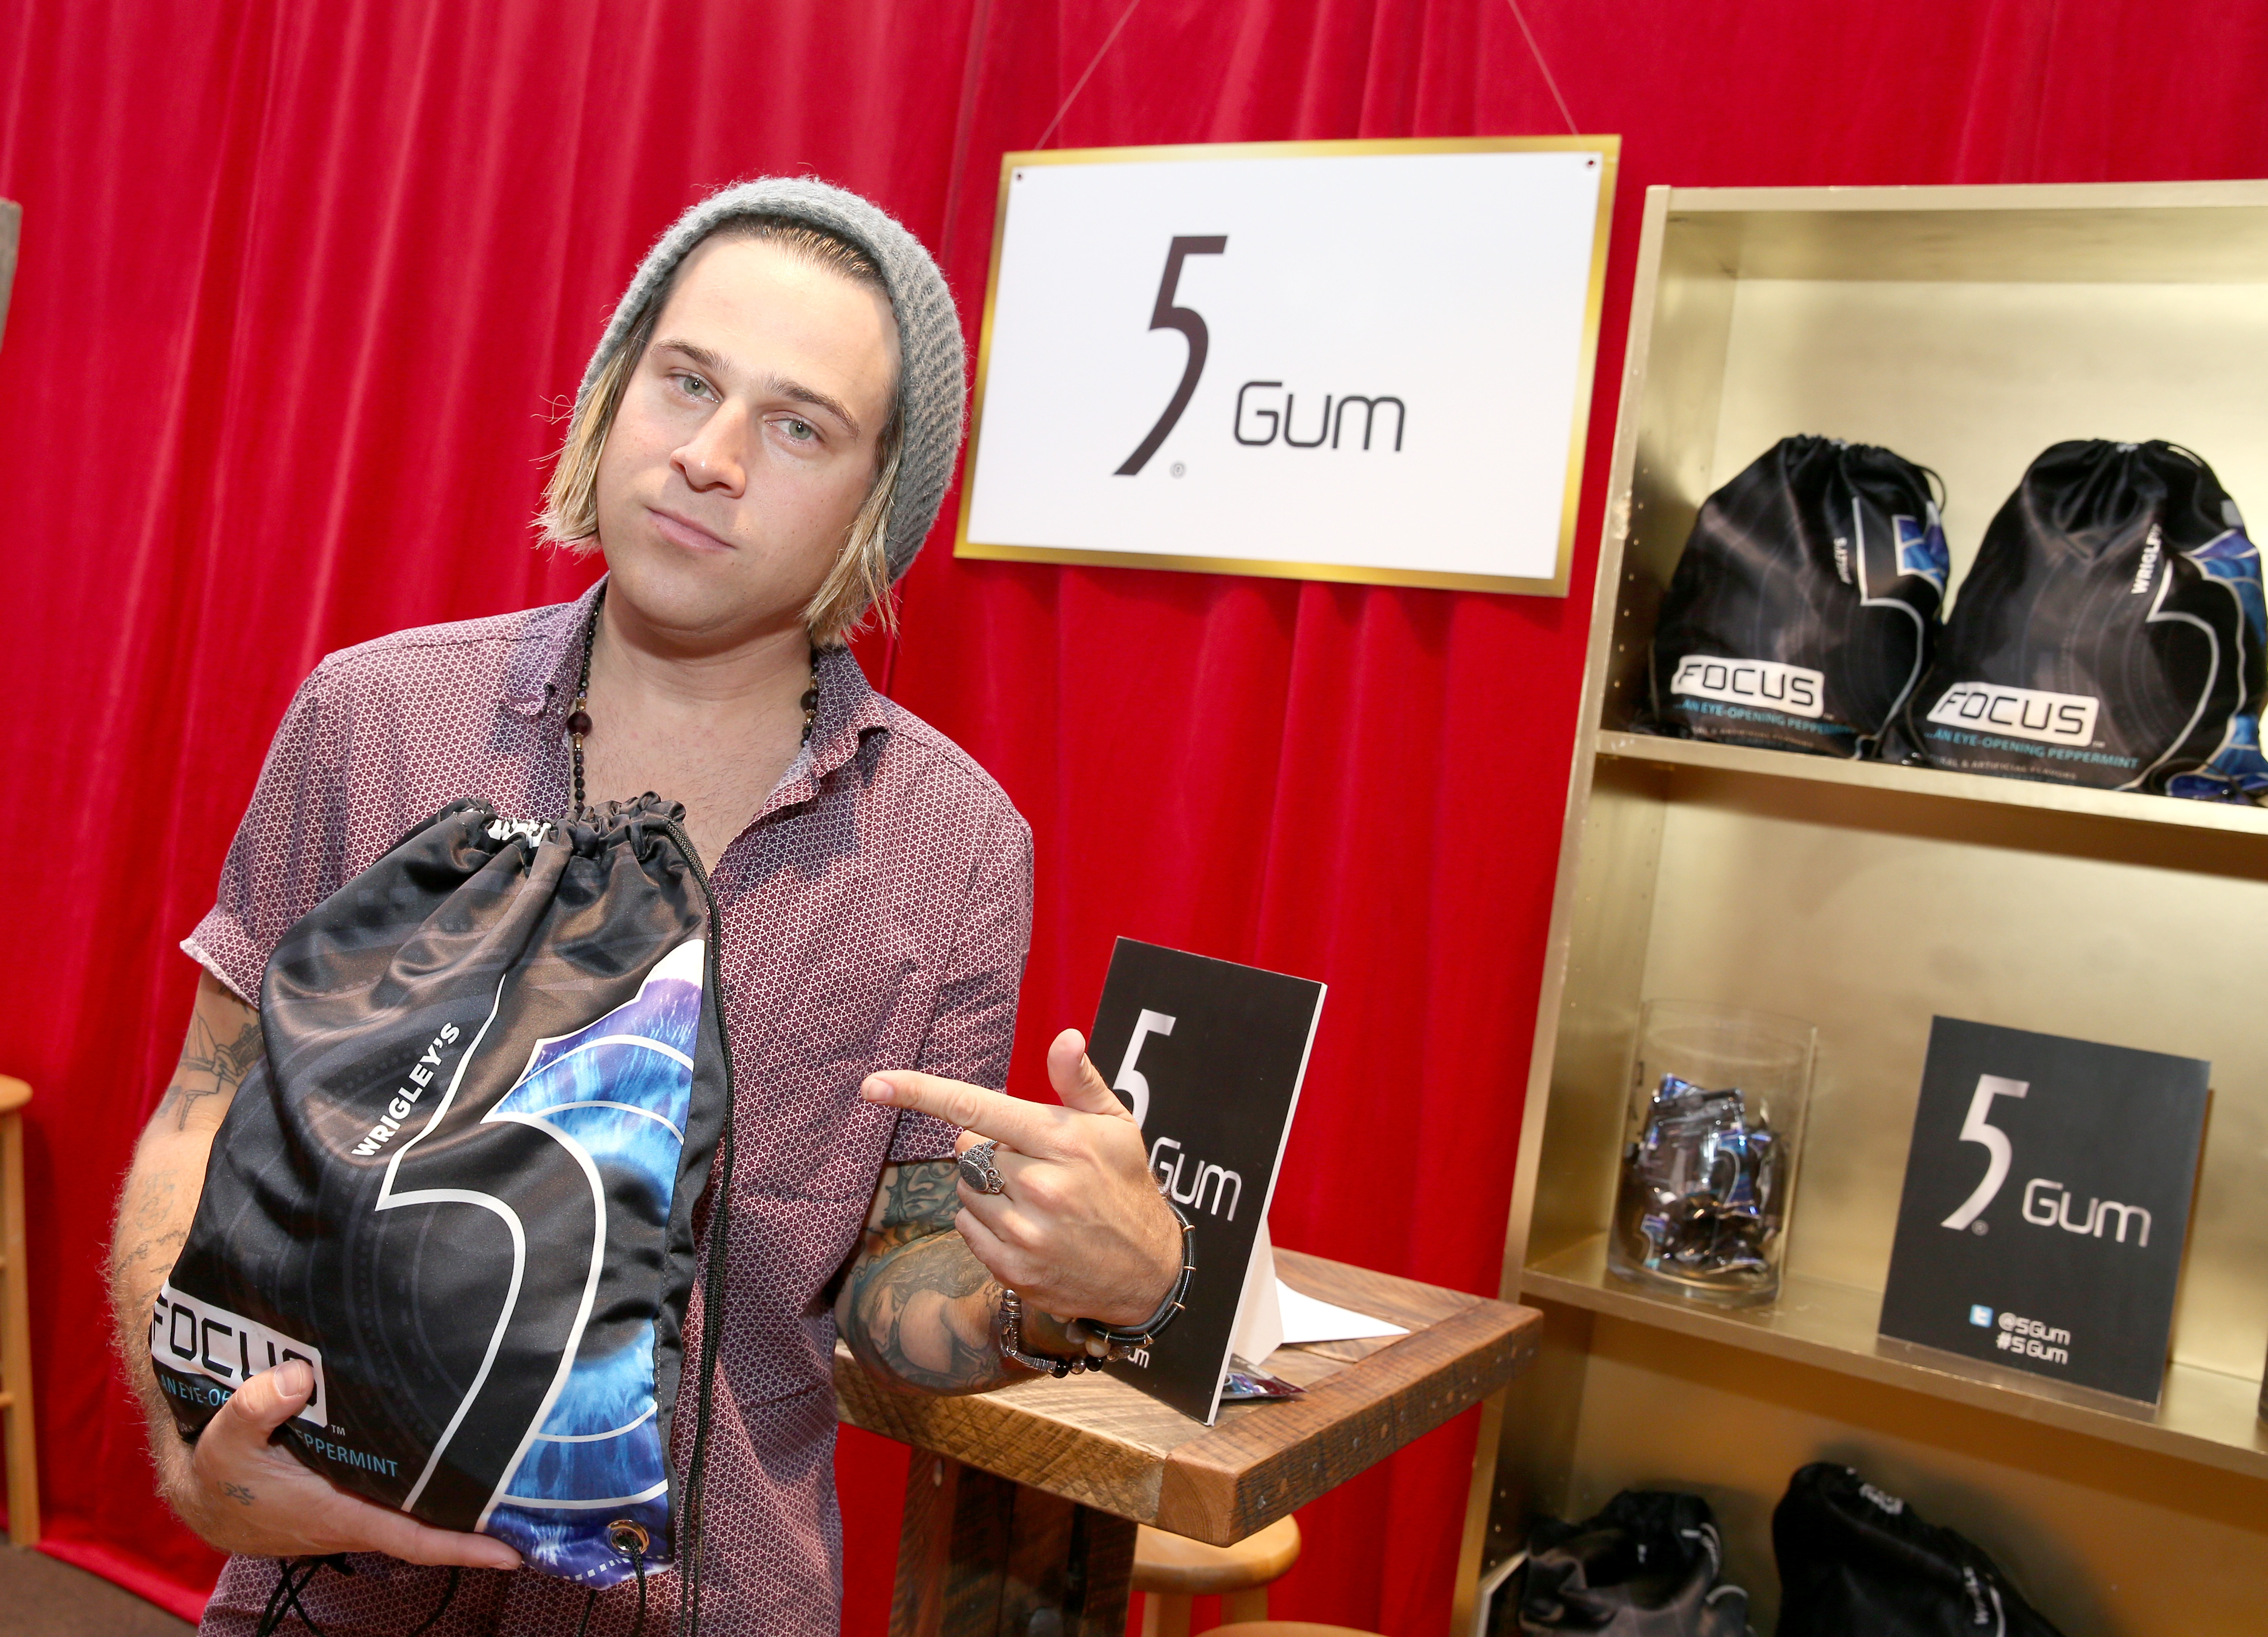 Singer Ryan Cabrera attends the GRAMMY Gift Lounge during the 56th Grammy Awards at Staples Center on January 23, 2014 in Los Angeles, California.  (Photo by Imeh Akpanudosen/WireImage)